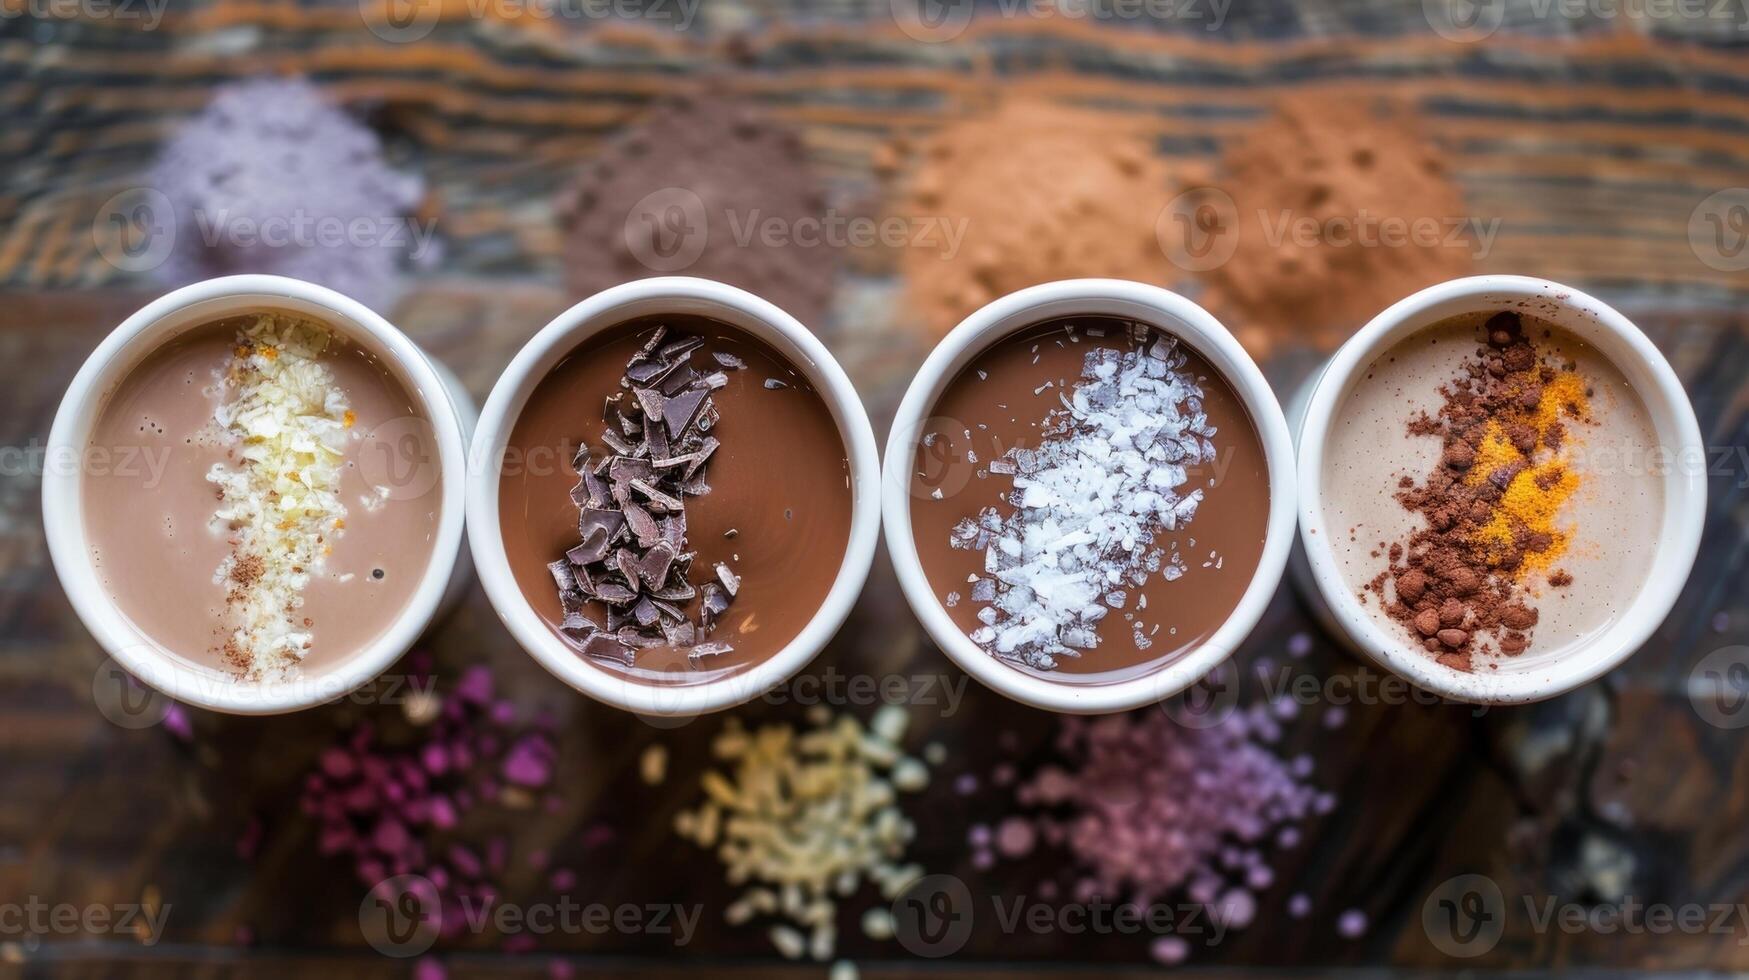 A selection of gourmet hot chocolate blends featuring unique flavors like lavender chili pepper and sea salt caramel for the adventurous taste buds photo